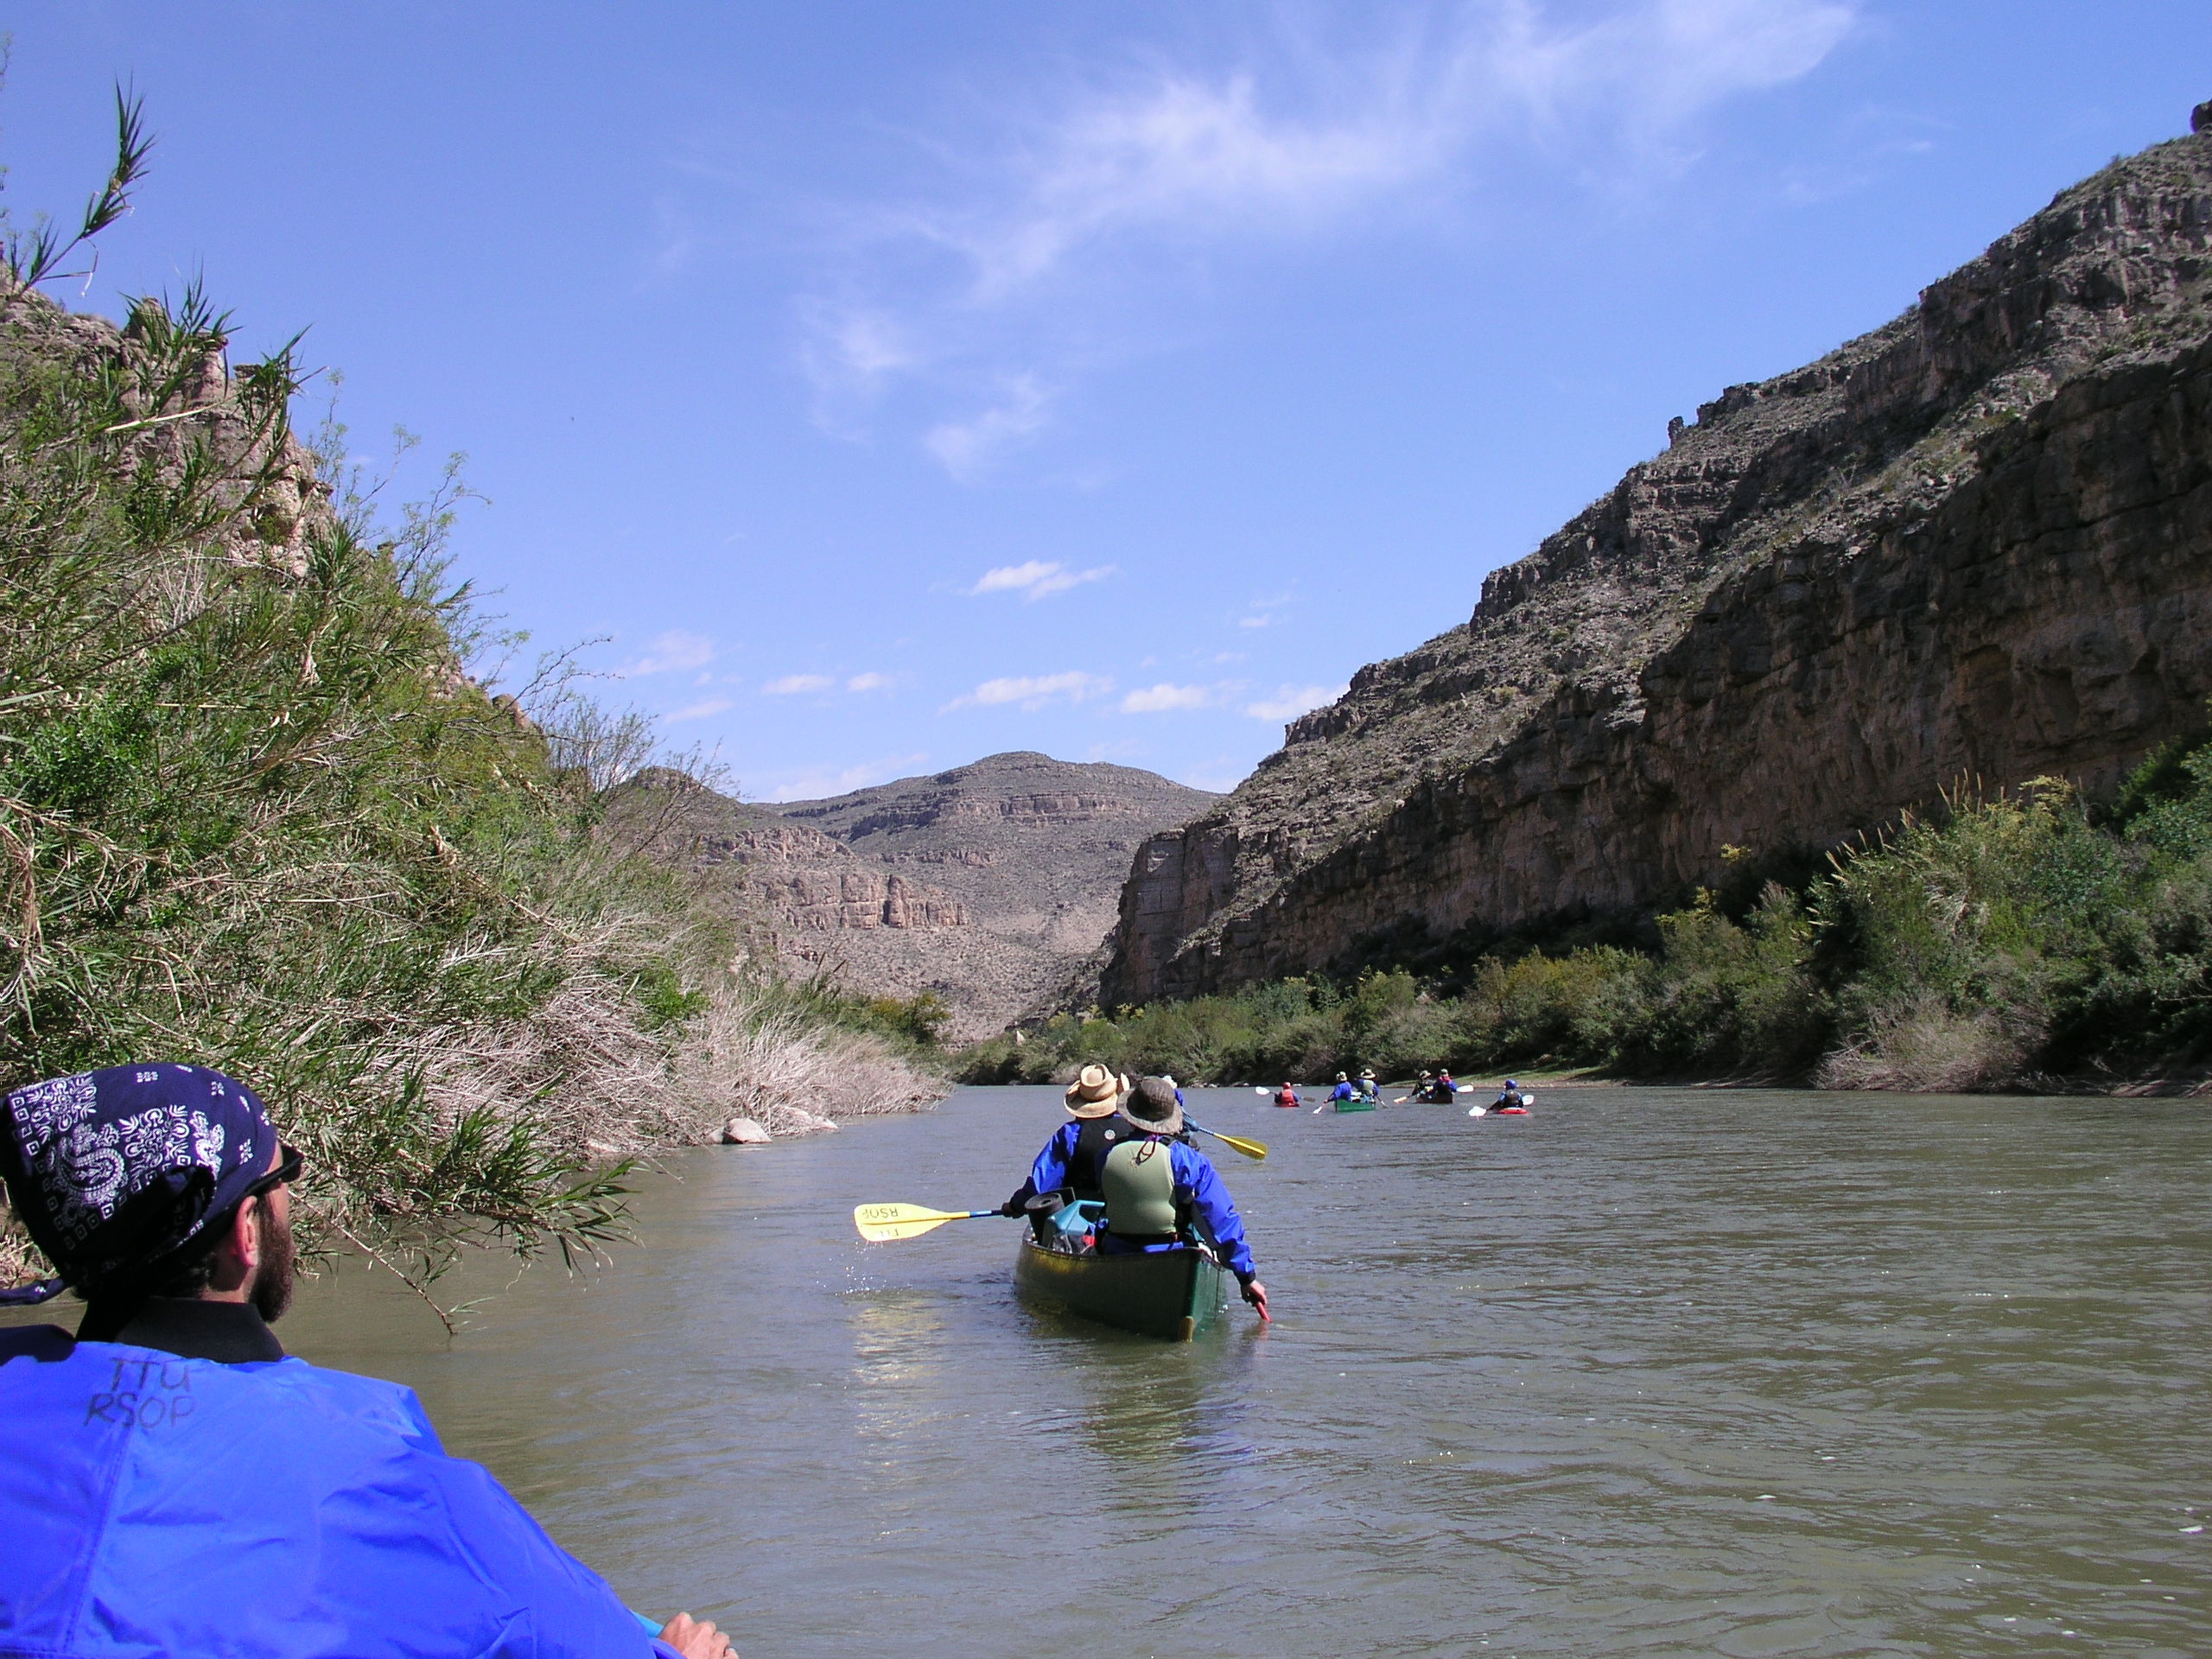 Outdoor Adventures offers canoeing, backpacking, and rock climbing trips for Spring Break